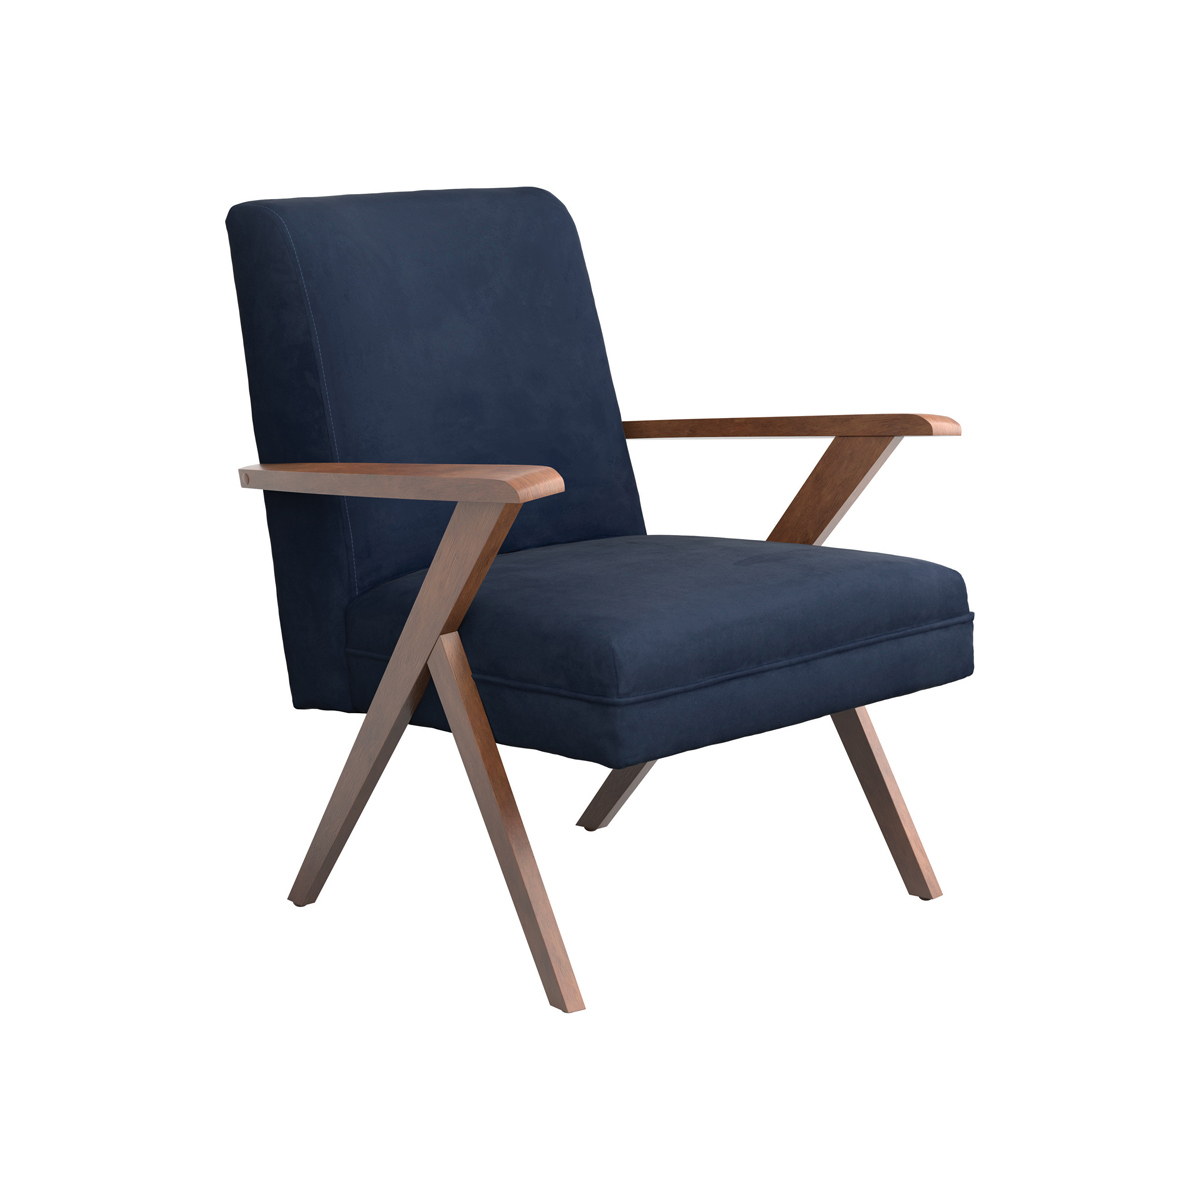 Contemporary Dual Tone Wooden Armchair With Padded Seat, Blue And Brown- Saltoro Sherpi